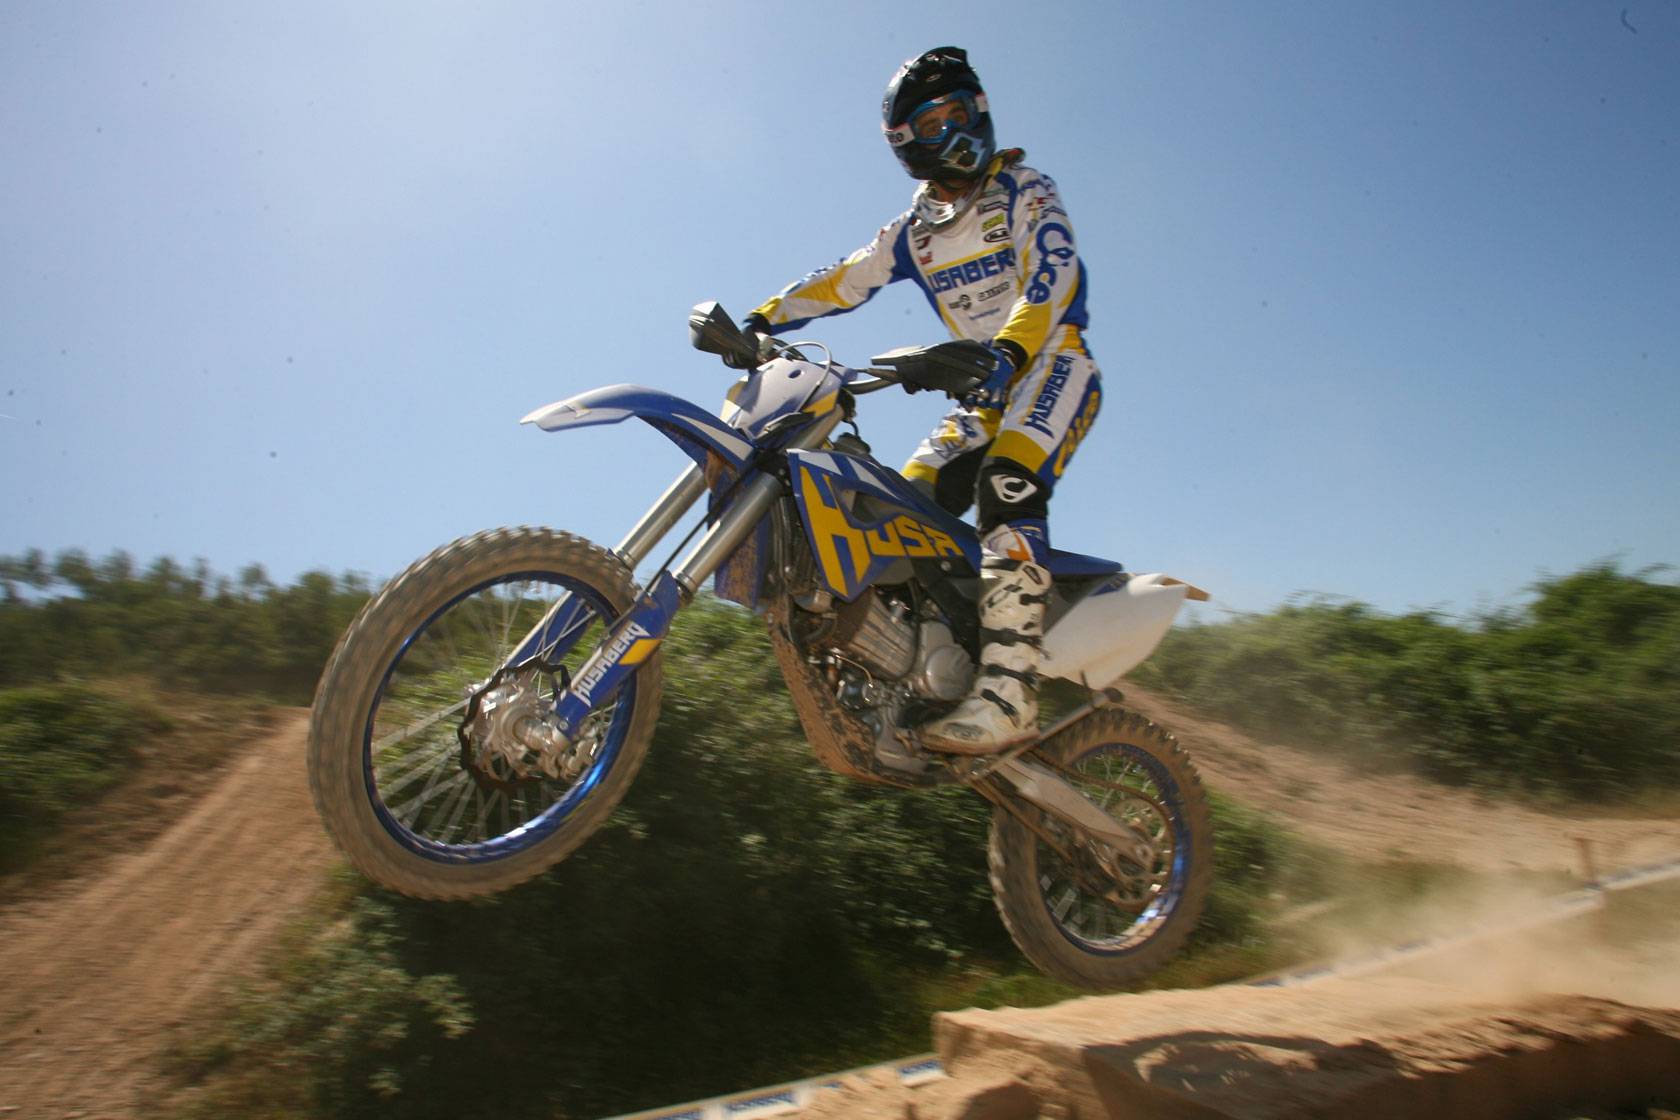 Husaberg fx450 cross country 2010-12 did z-vmx silver x-ring chain jt sprockets on 2040-motos